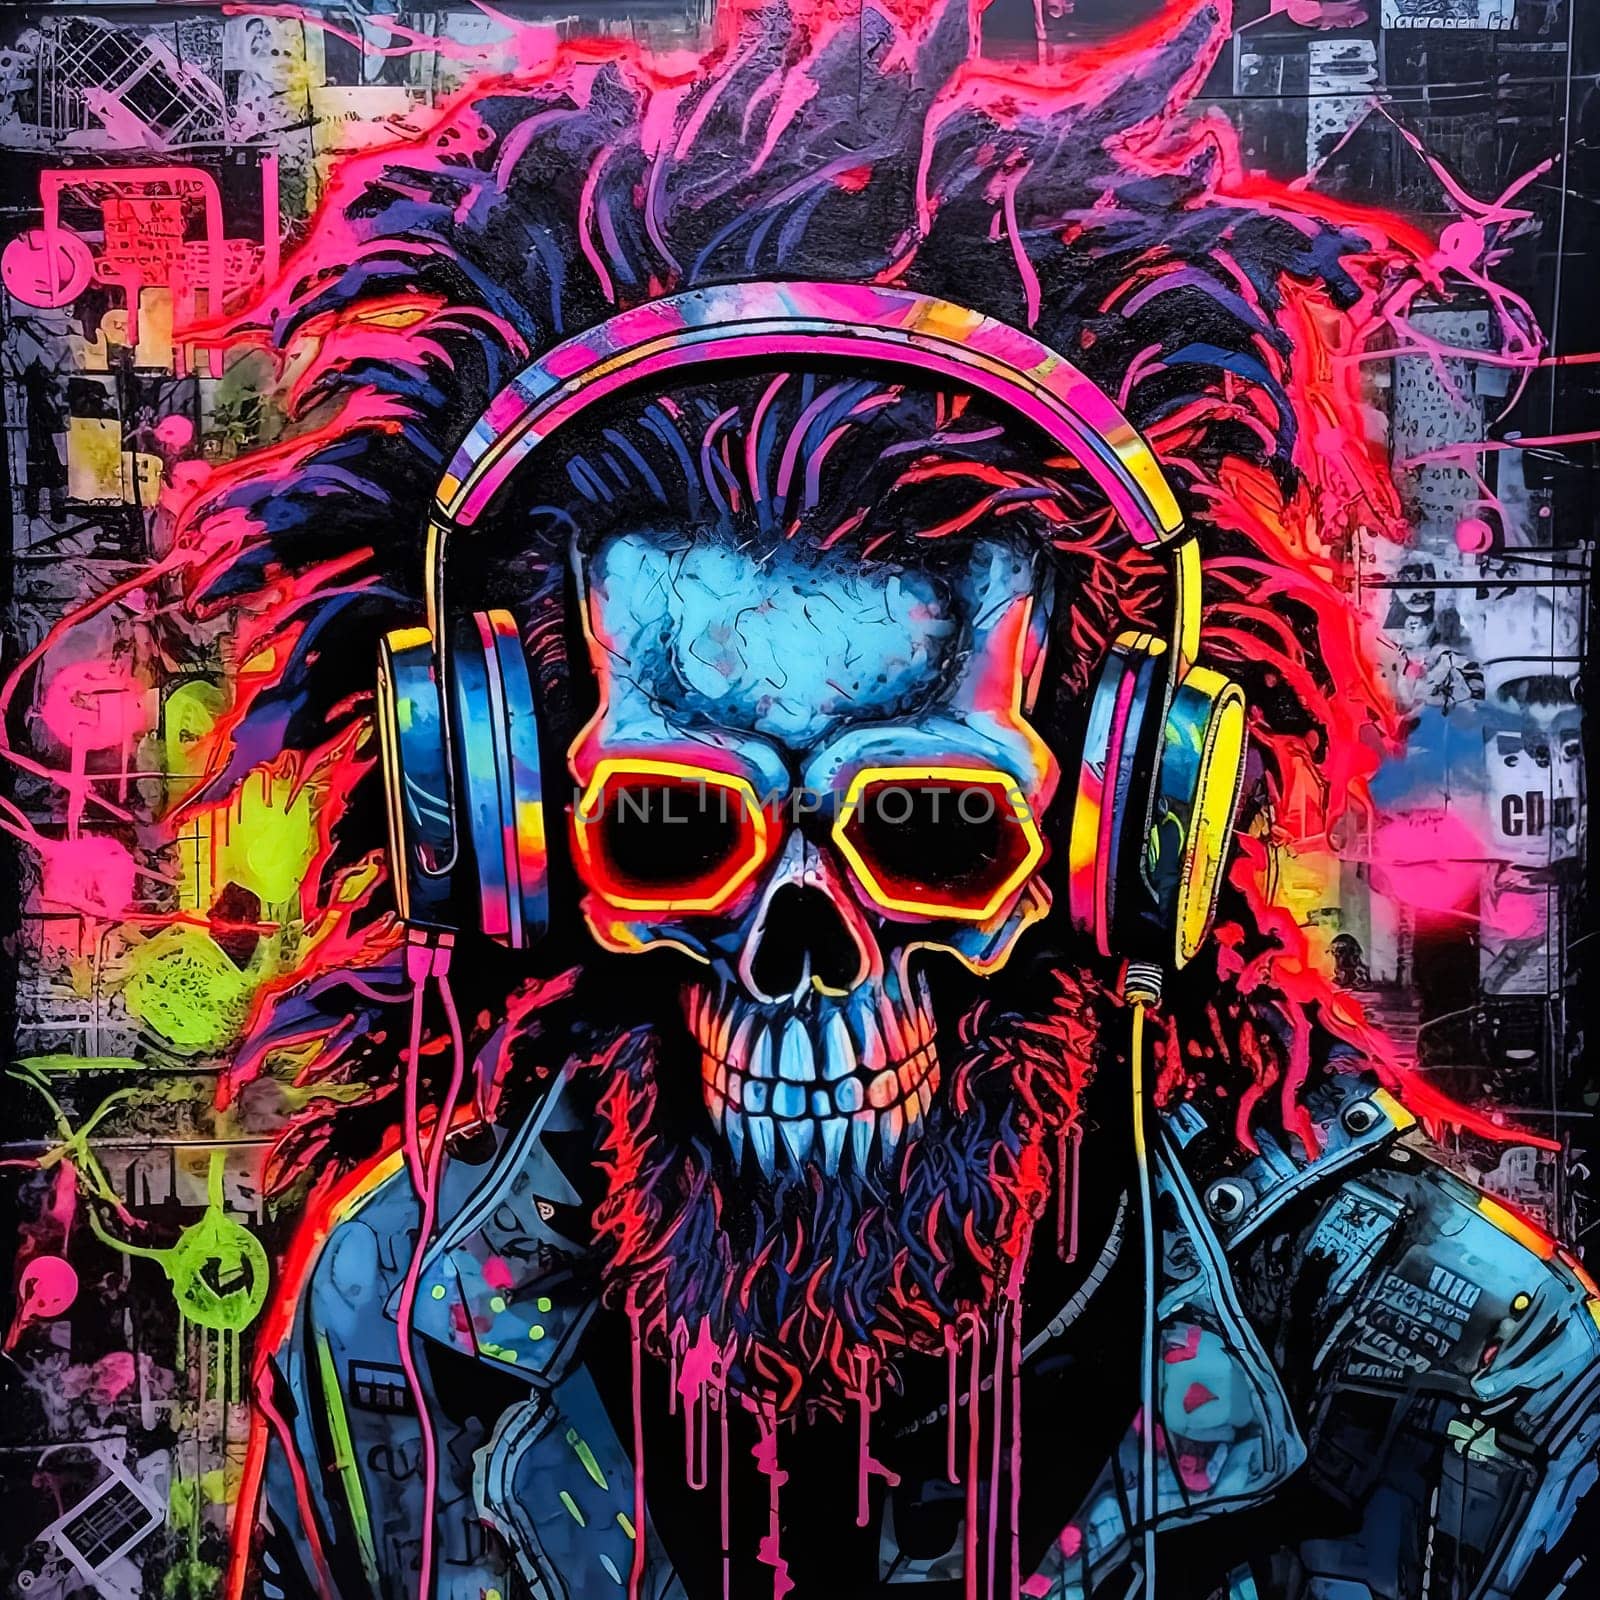 A man with a beard and sunglasses is wearing headphones and smiling. The background features skulls and bones, giving the image a dark and edgy vibe